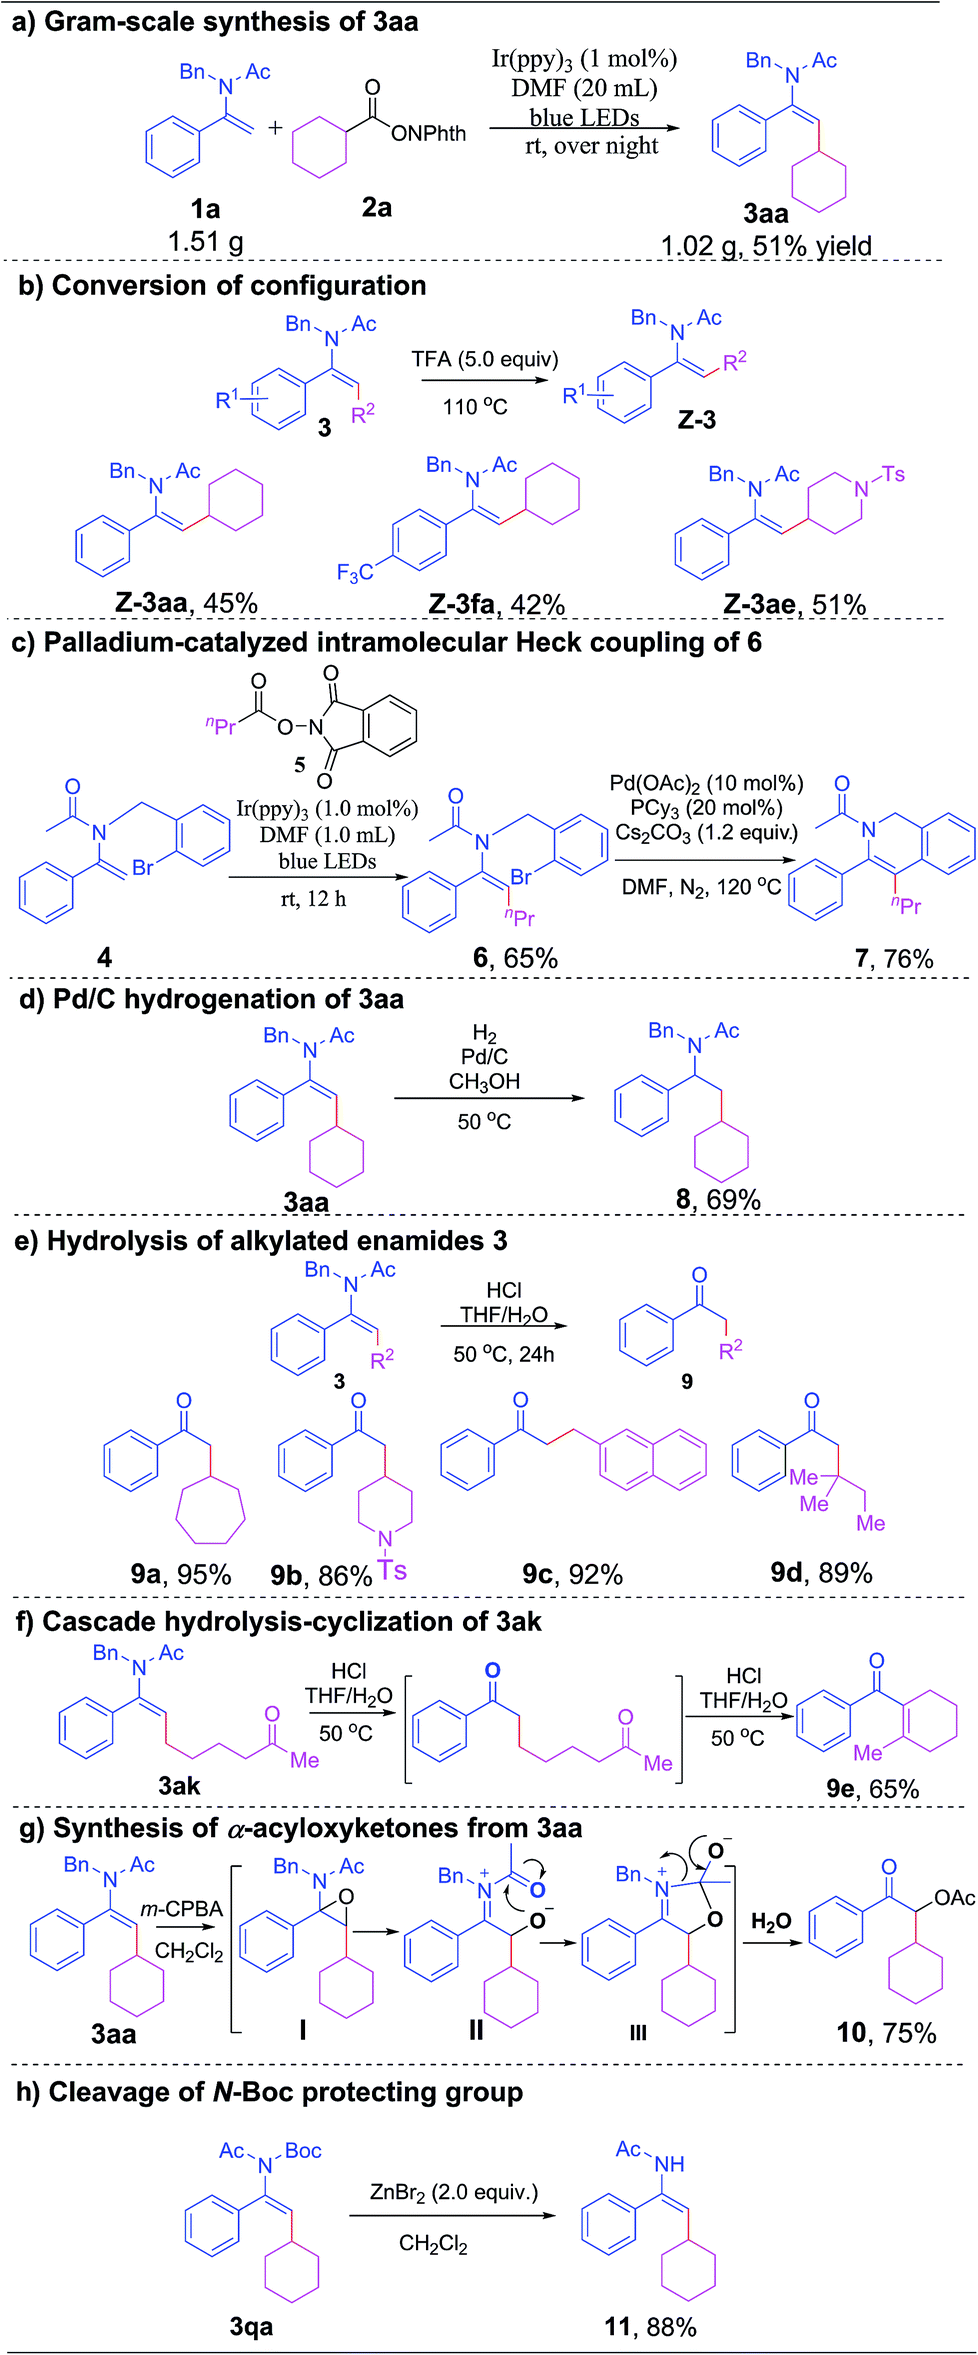 Photoredox Catalyzed Stereoselective Alkylation Of Enamides With N Hydroxyphthalimide Esters Via Decarboxylative Cross Coupling Reactions Chemical Science Rsc Publishing Doi 10 1039 C9sck